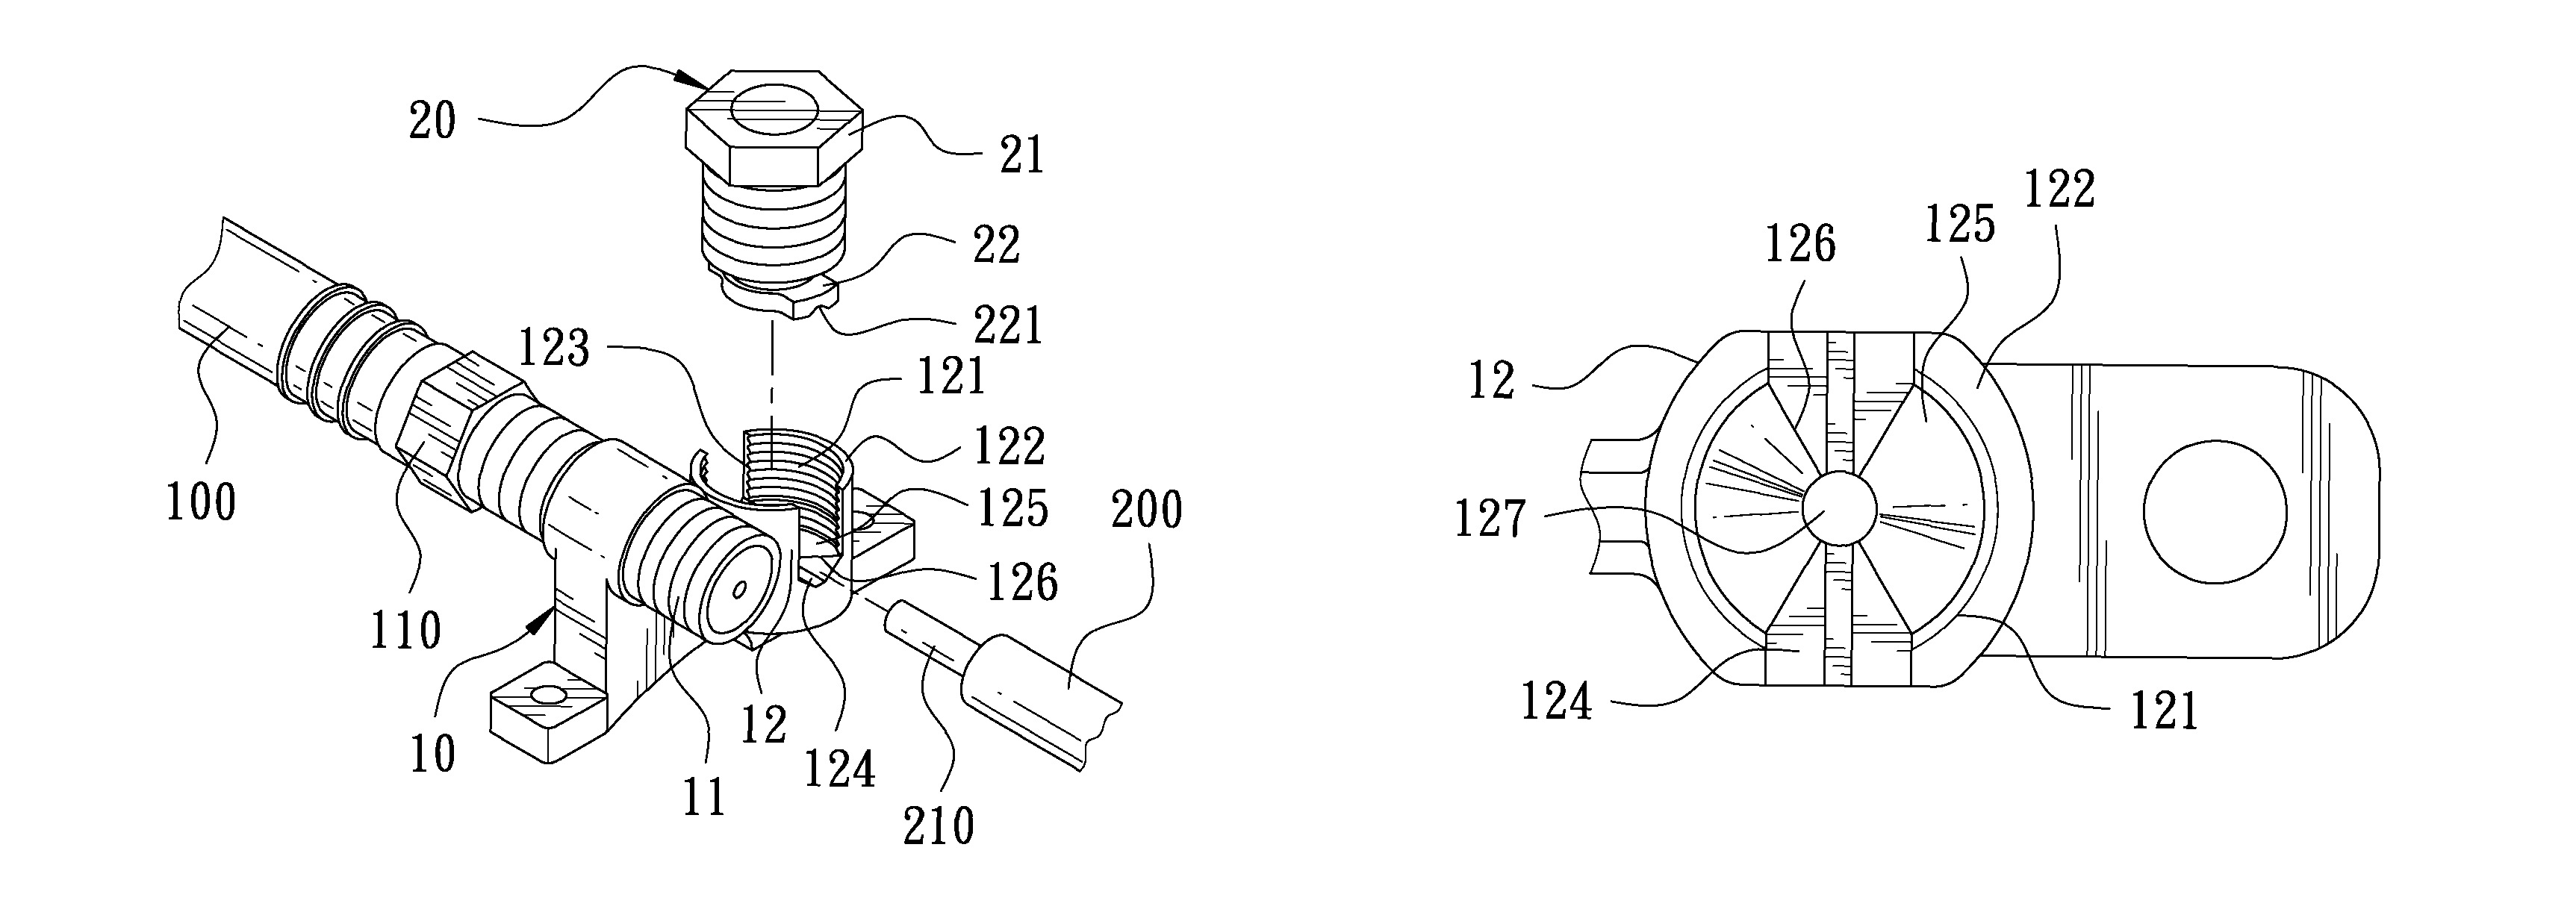 Wedge of a cable connector grounding device